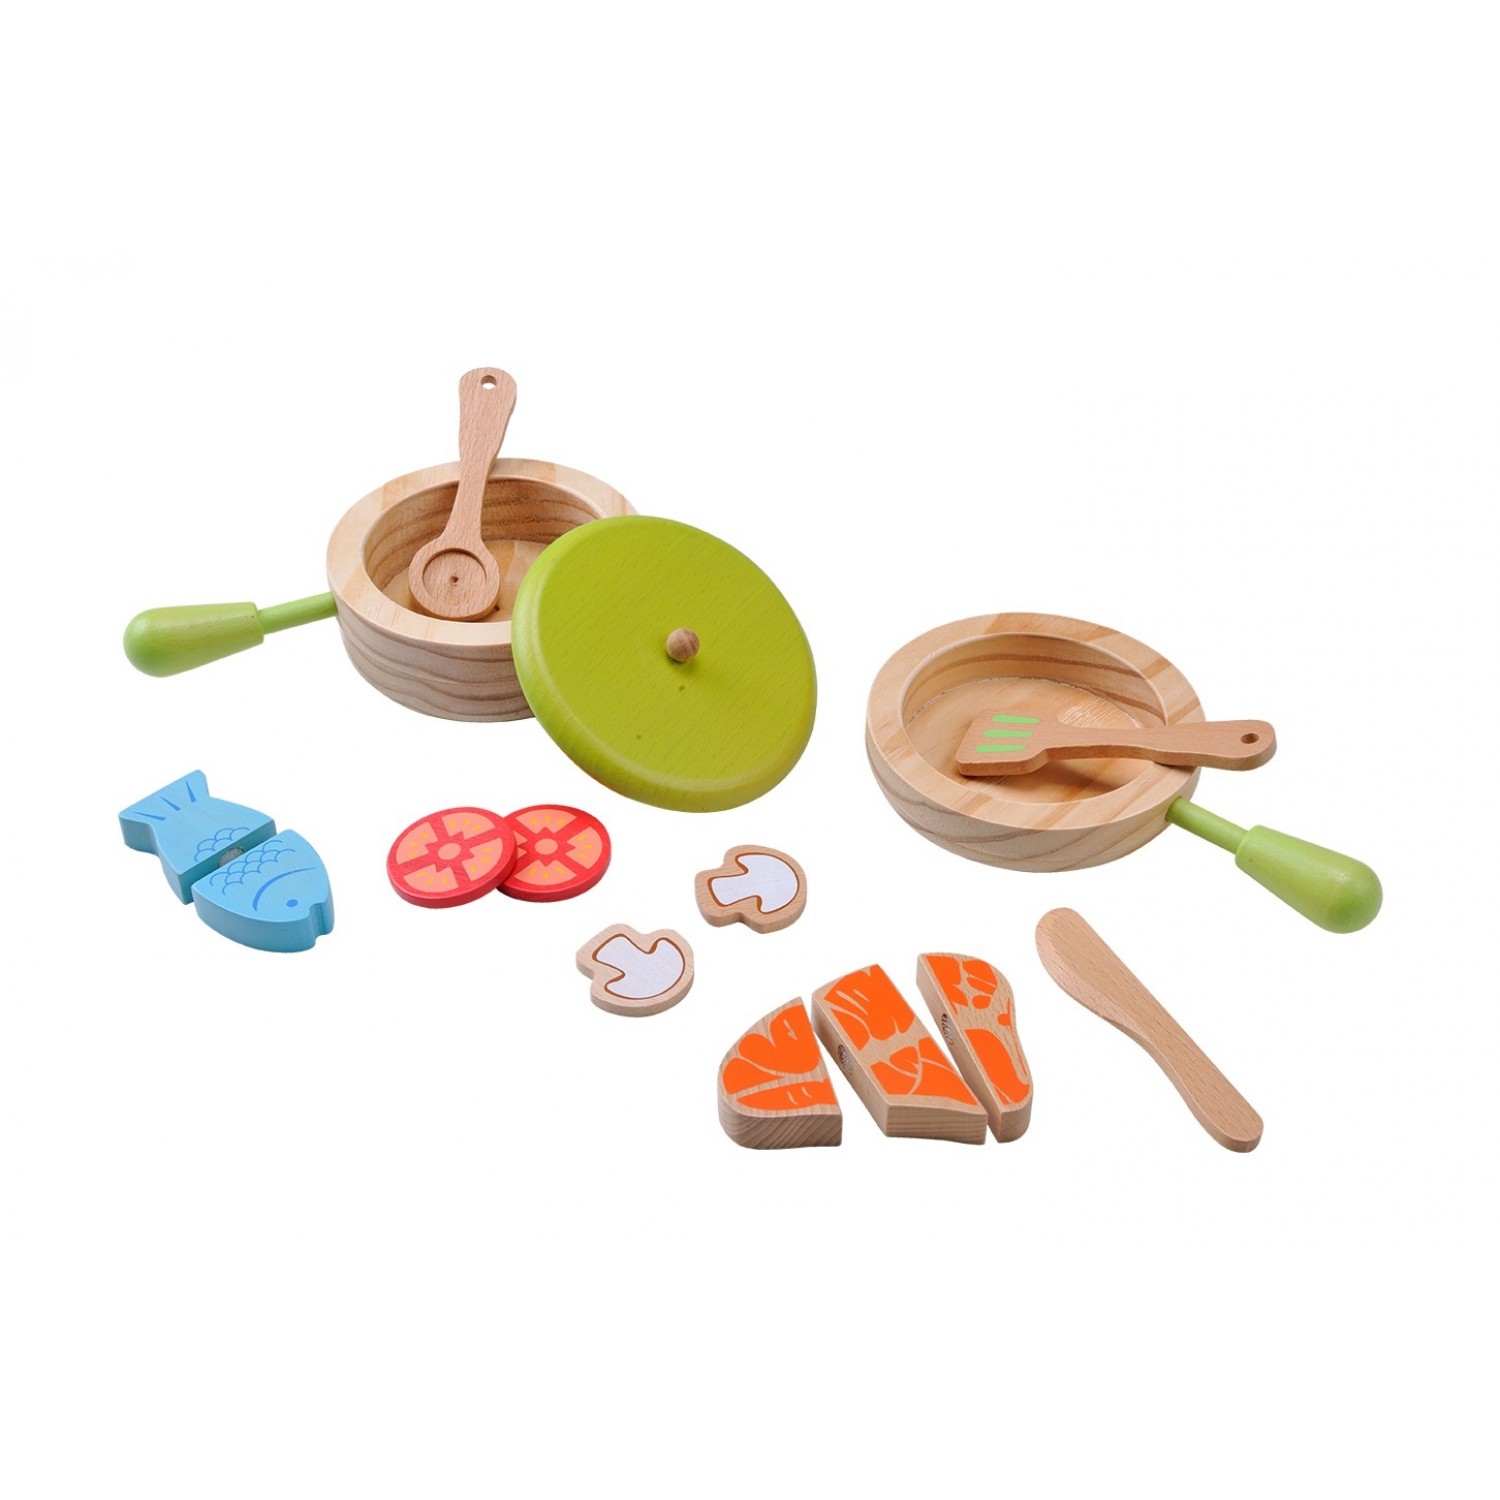 EverEarth Pots and Pan Cooking Set Kids Pretend Play Eco-Friendly 